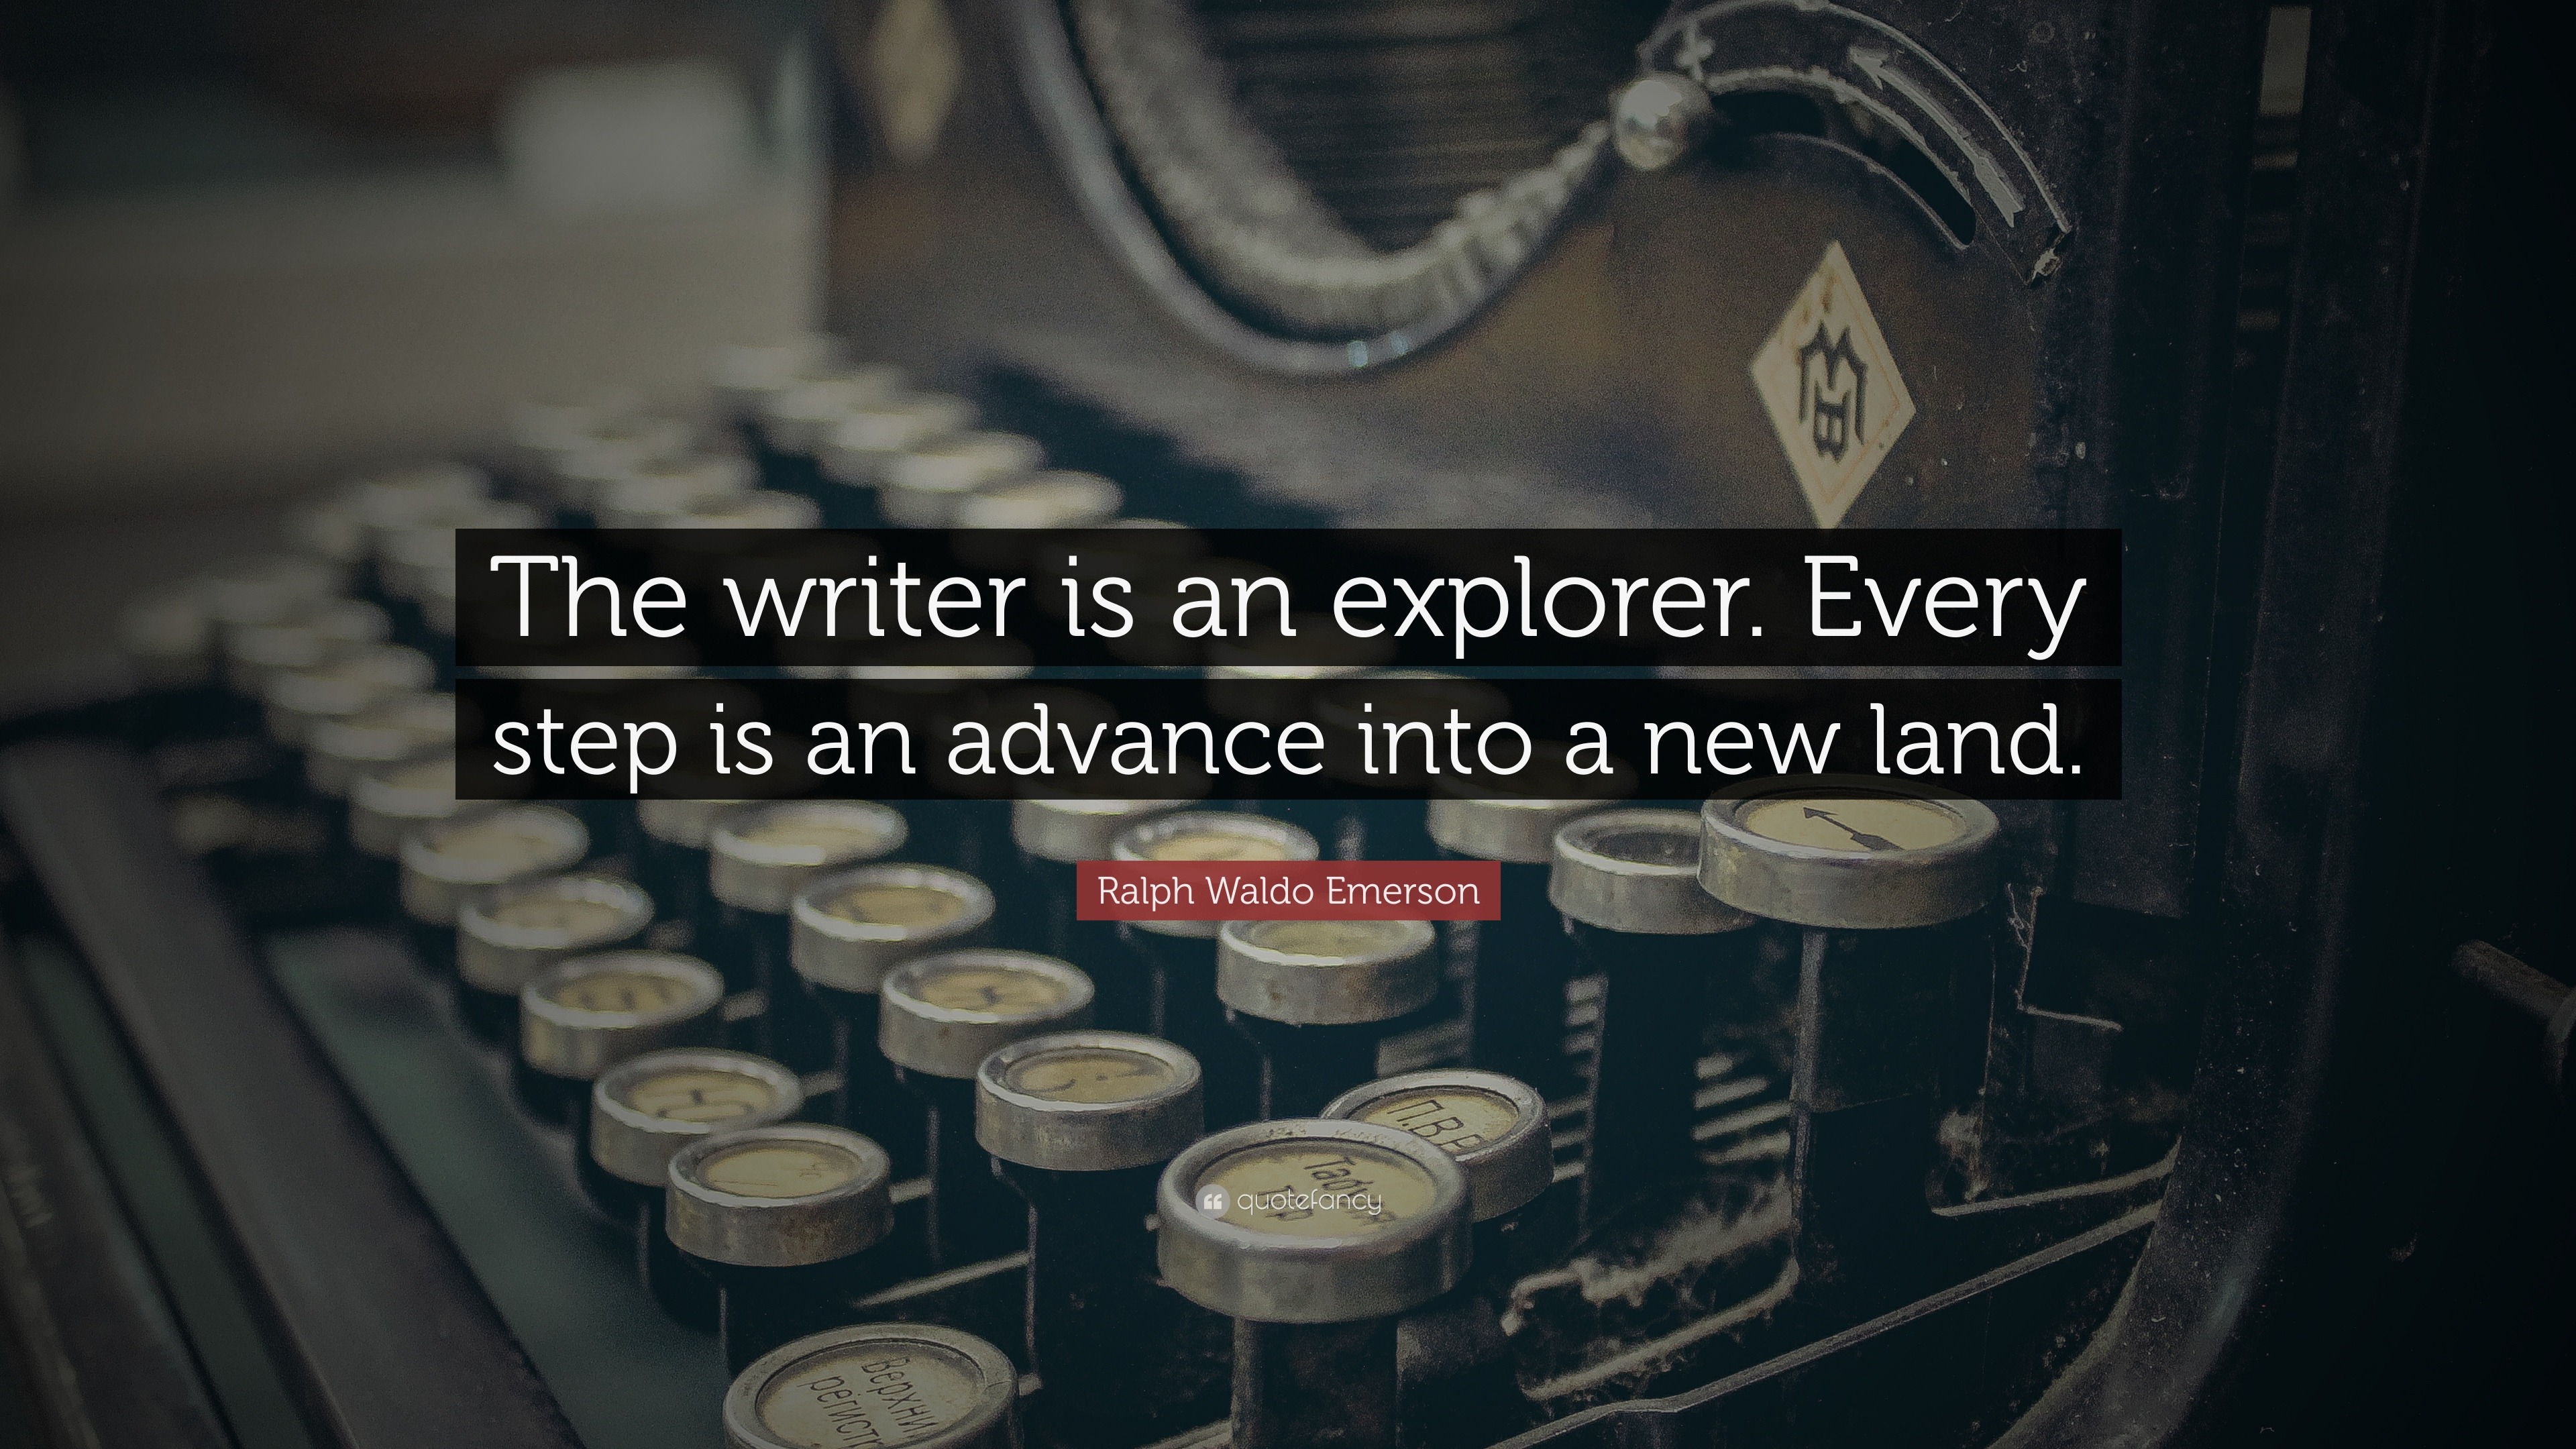 Ralph Waldo Emerson Quote: The writer is an explorer Every step is an